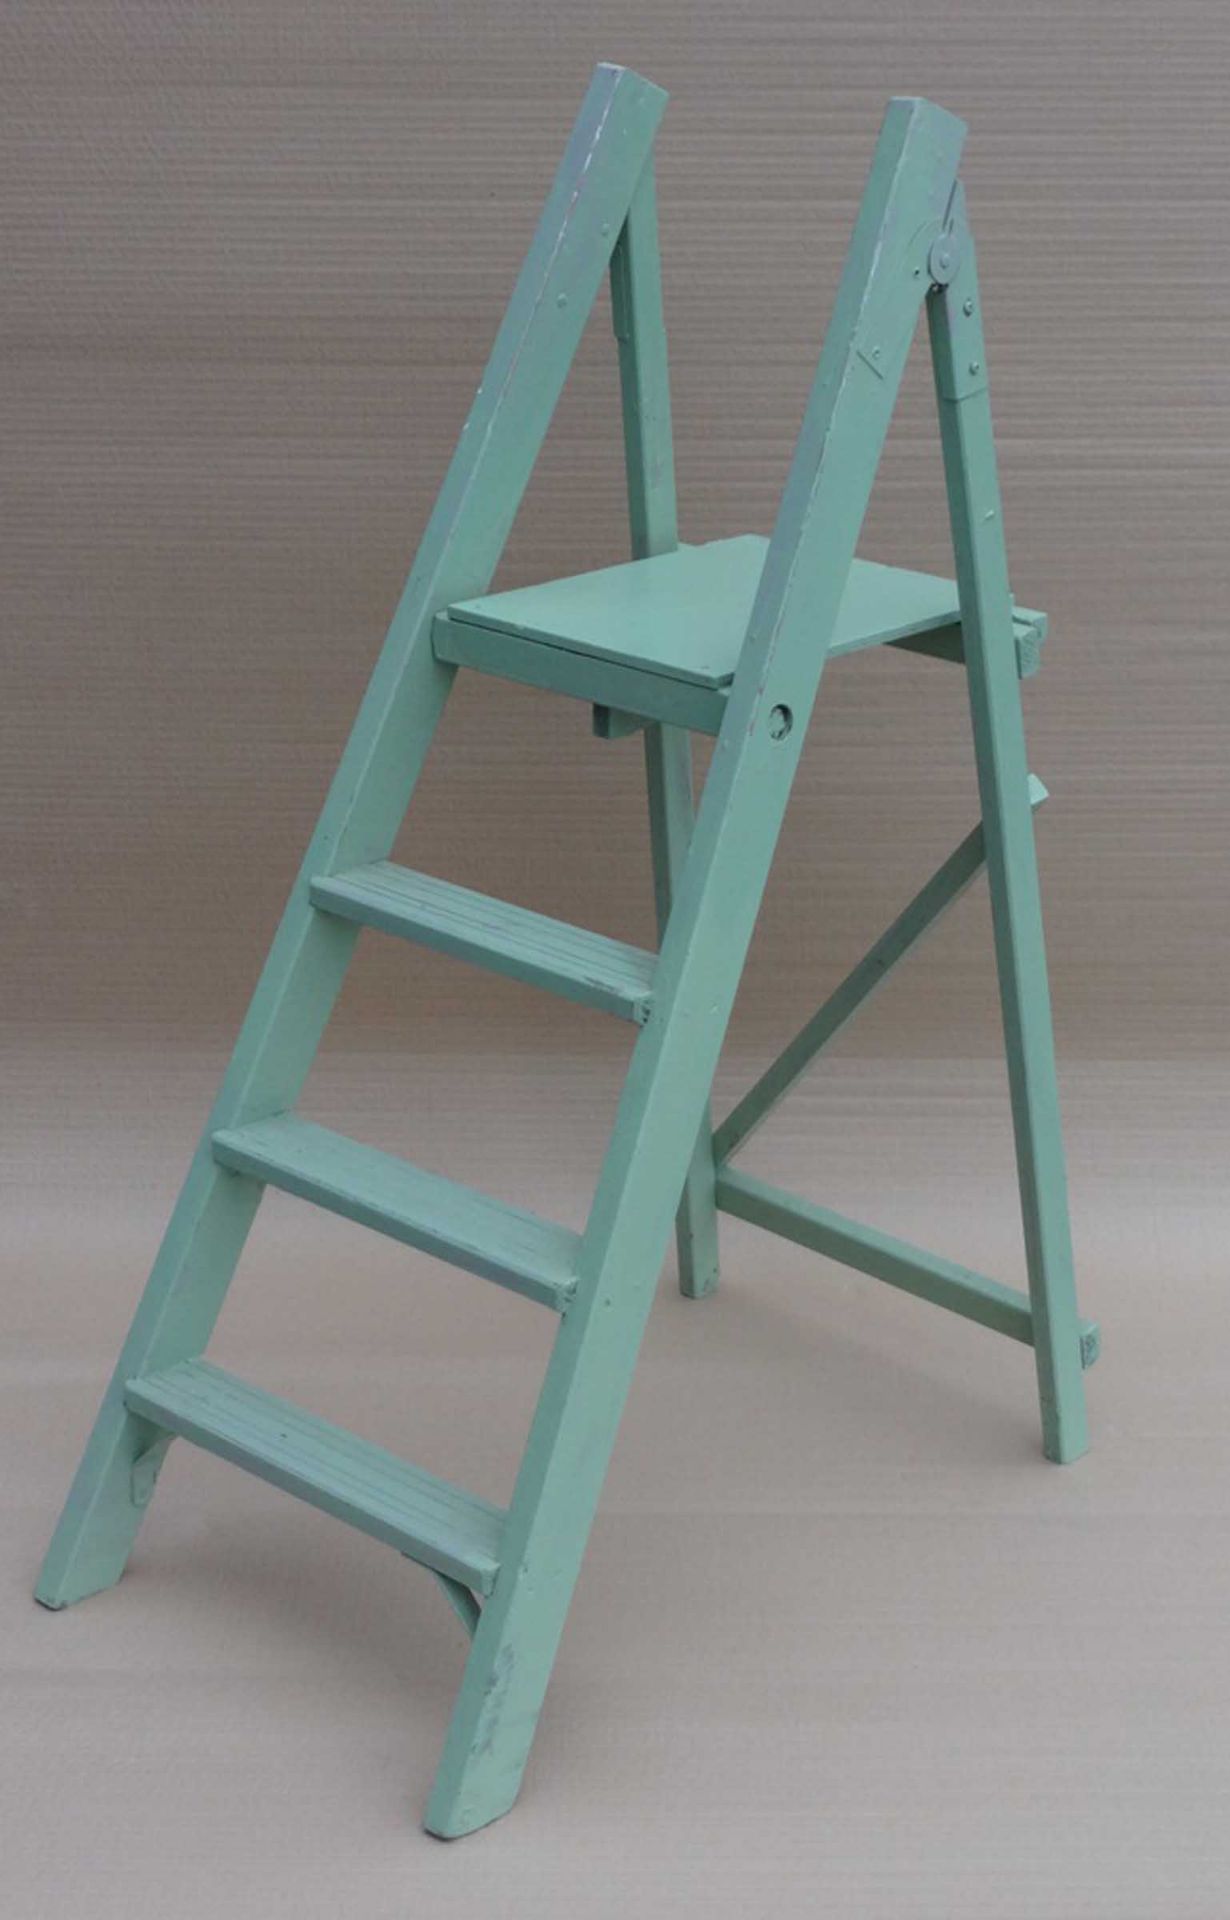 A set of painted wooden step ladders, 110x46x72cm.